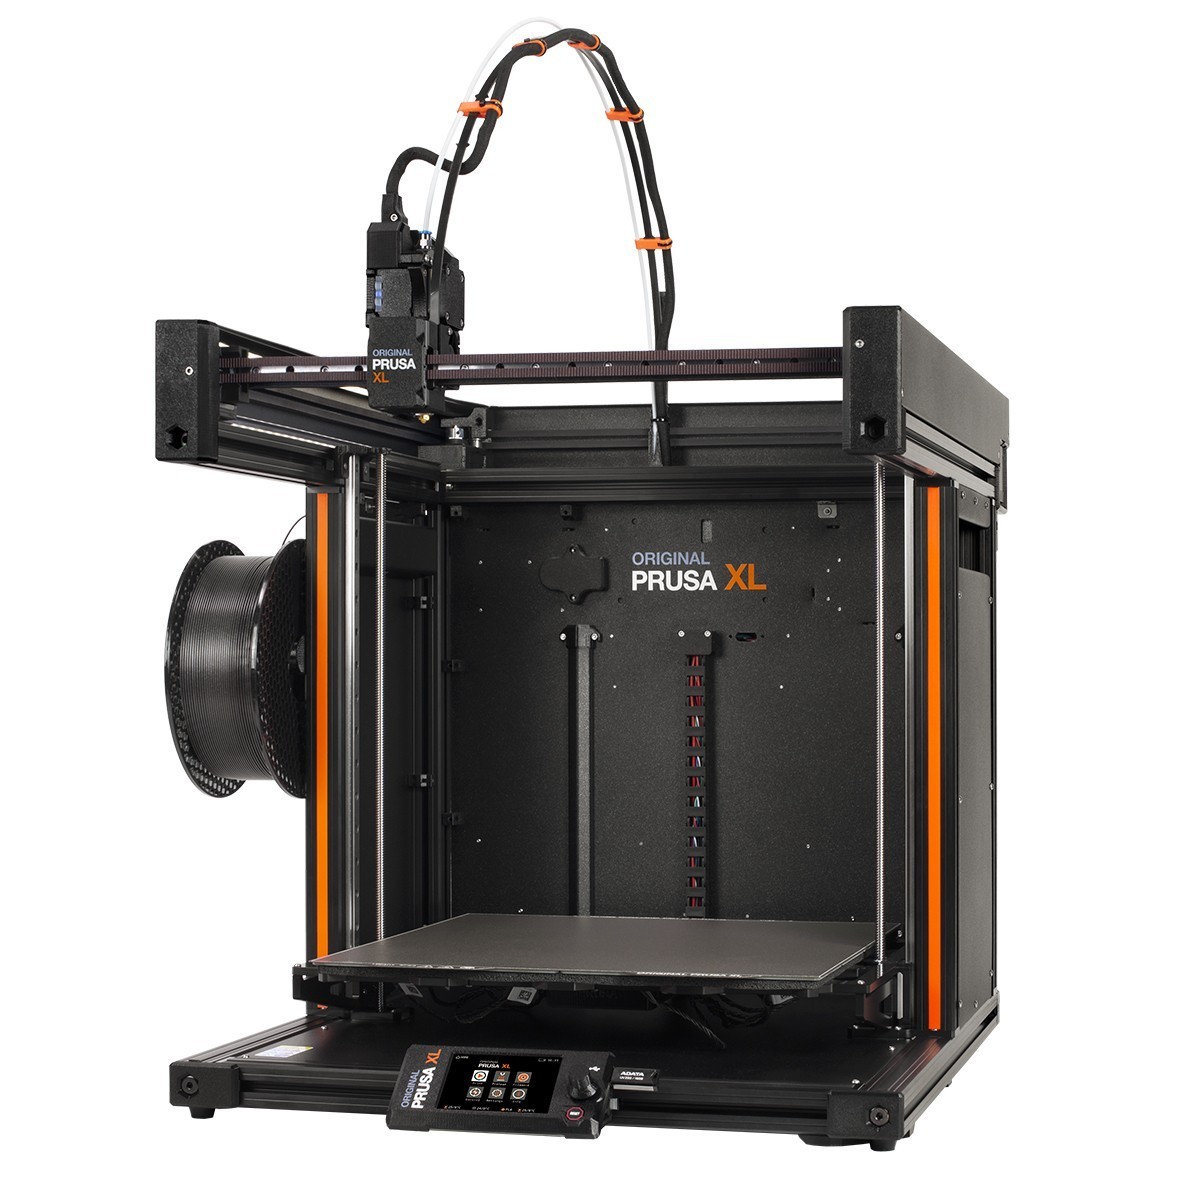 Nozzle V6 0.4 mm  Original Prusa 3D printers directly from Josef Prusa